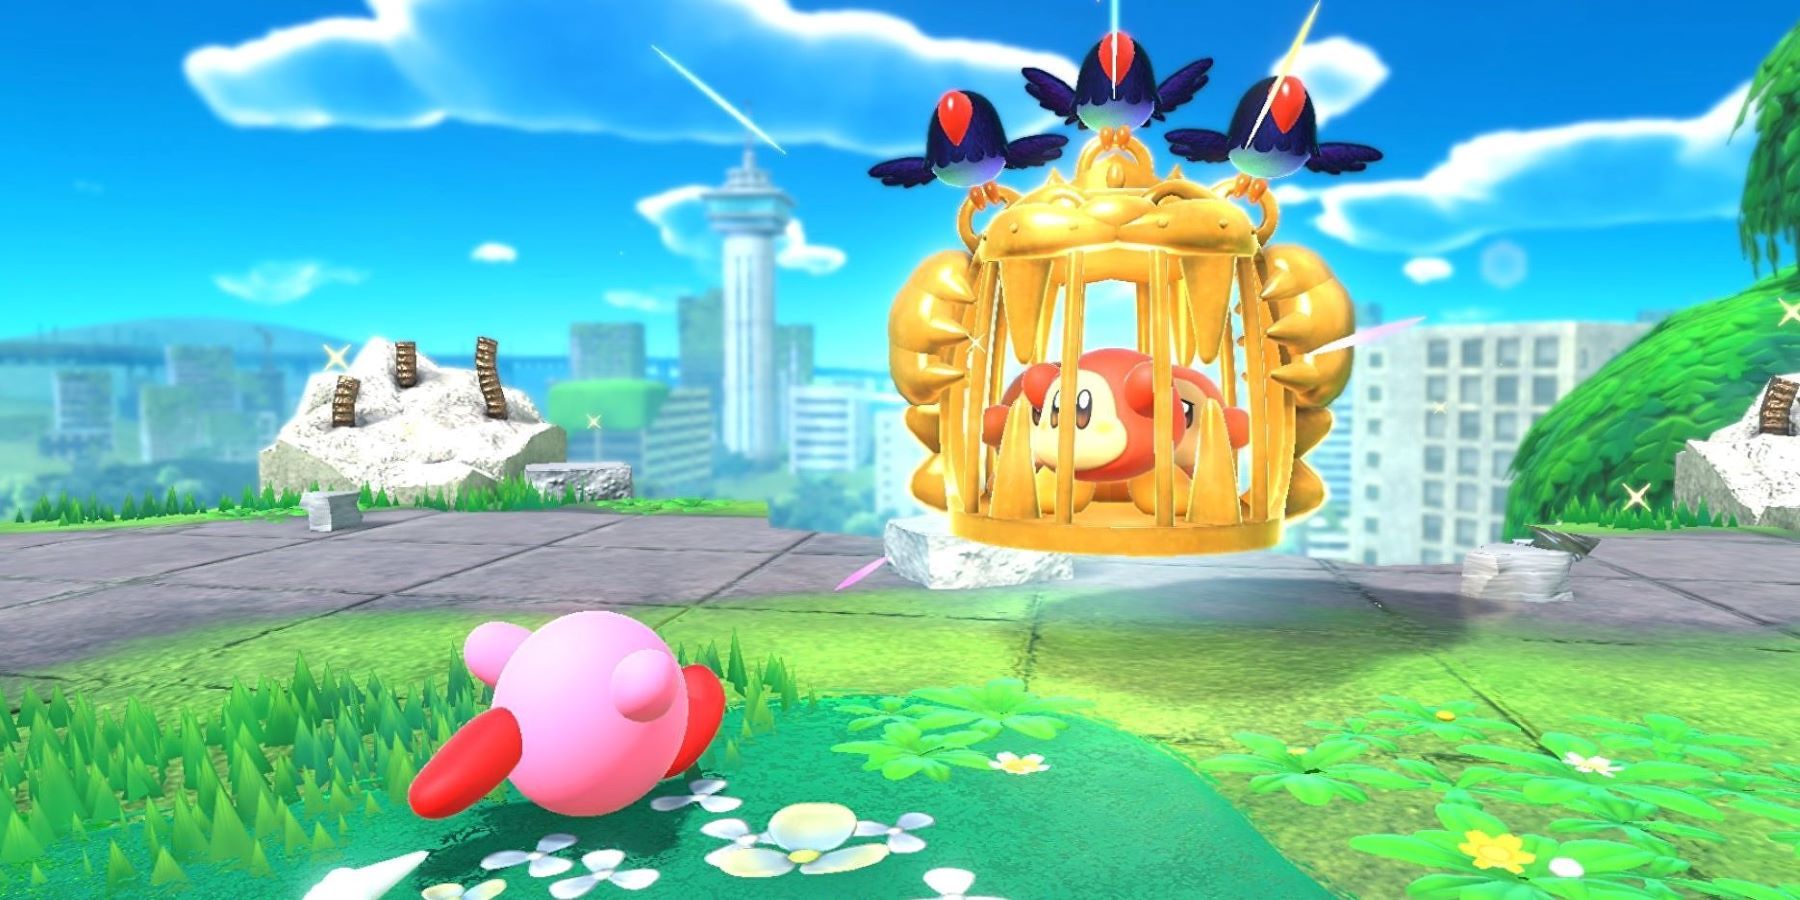 Kirby coming to save some caged Waddle Dees in Kirby and the Forgotten Land